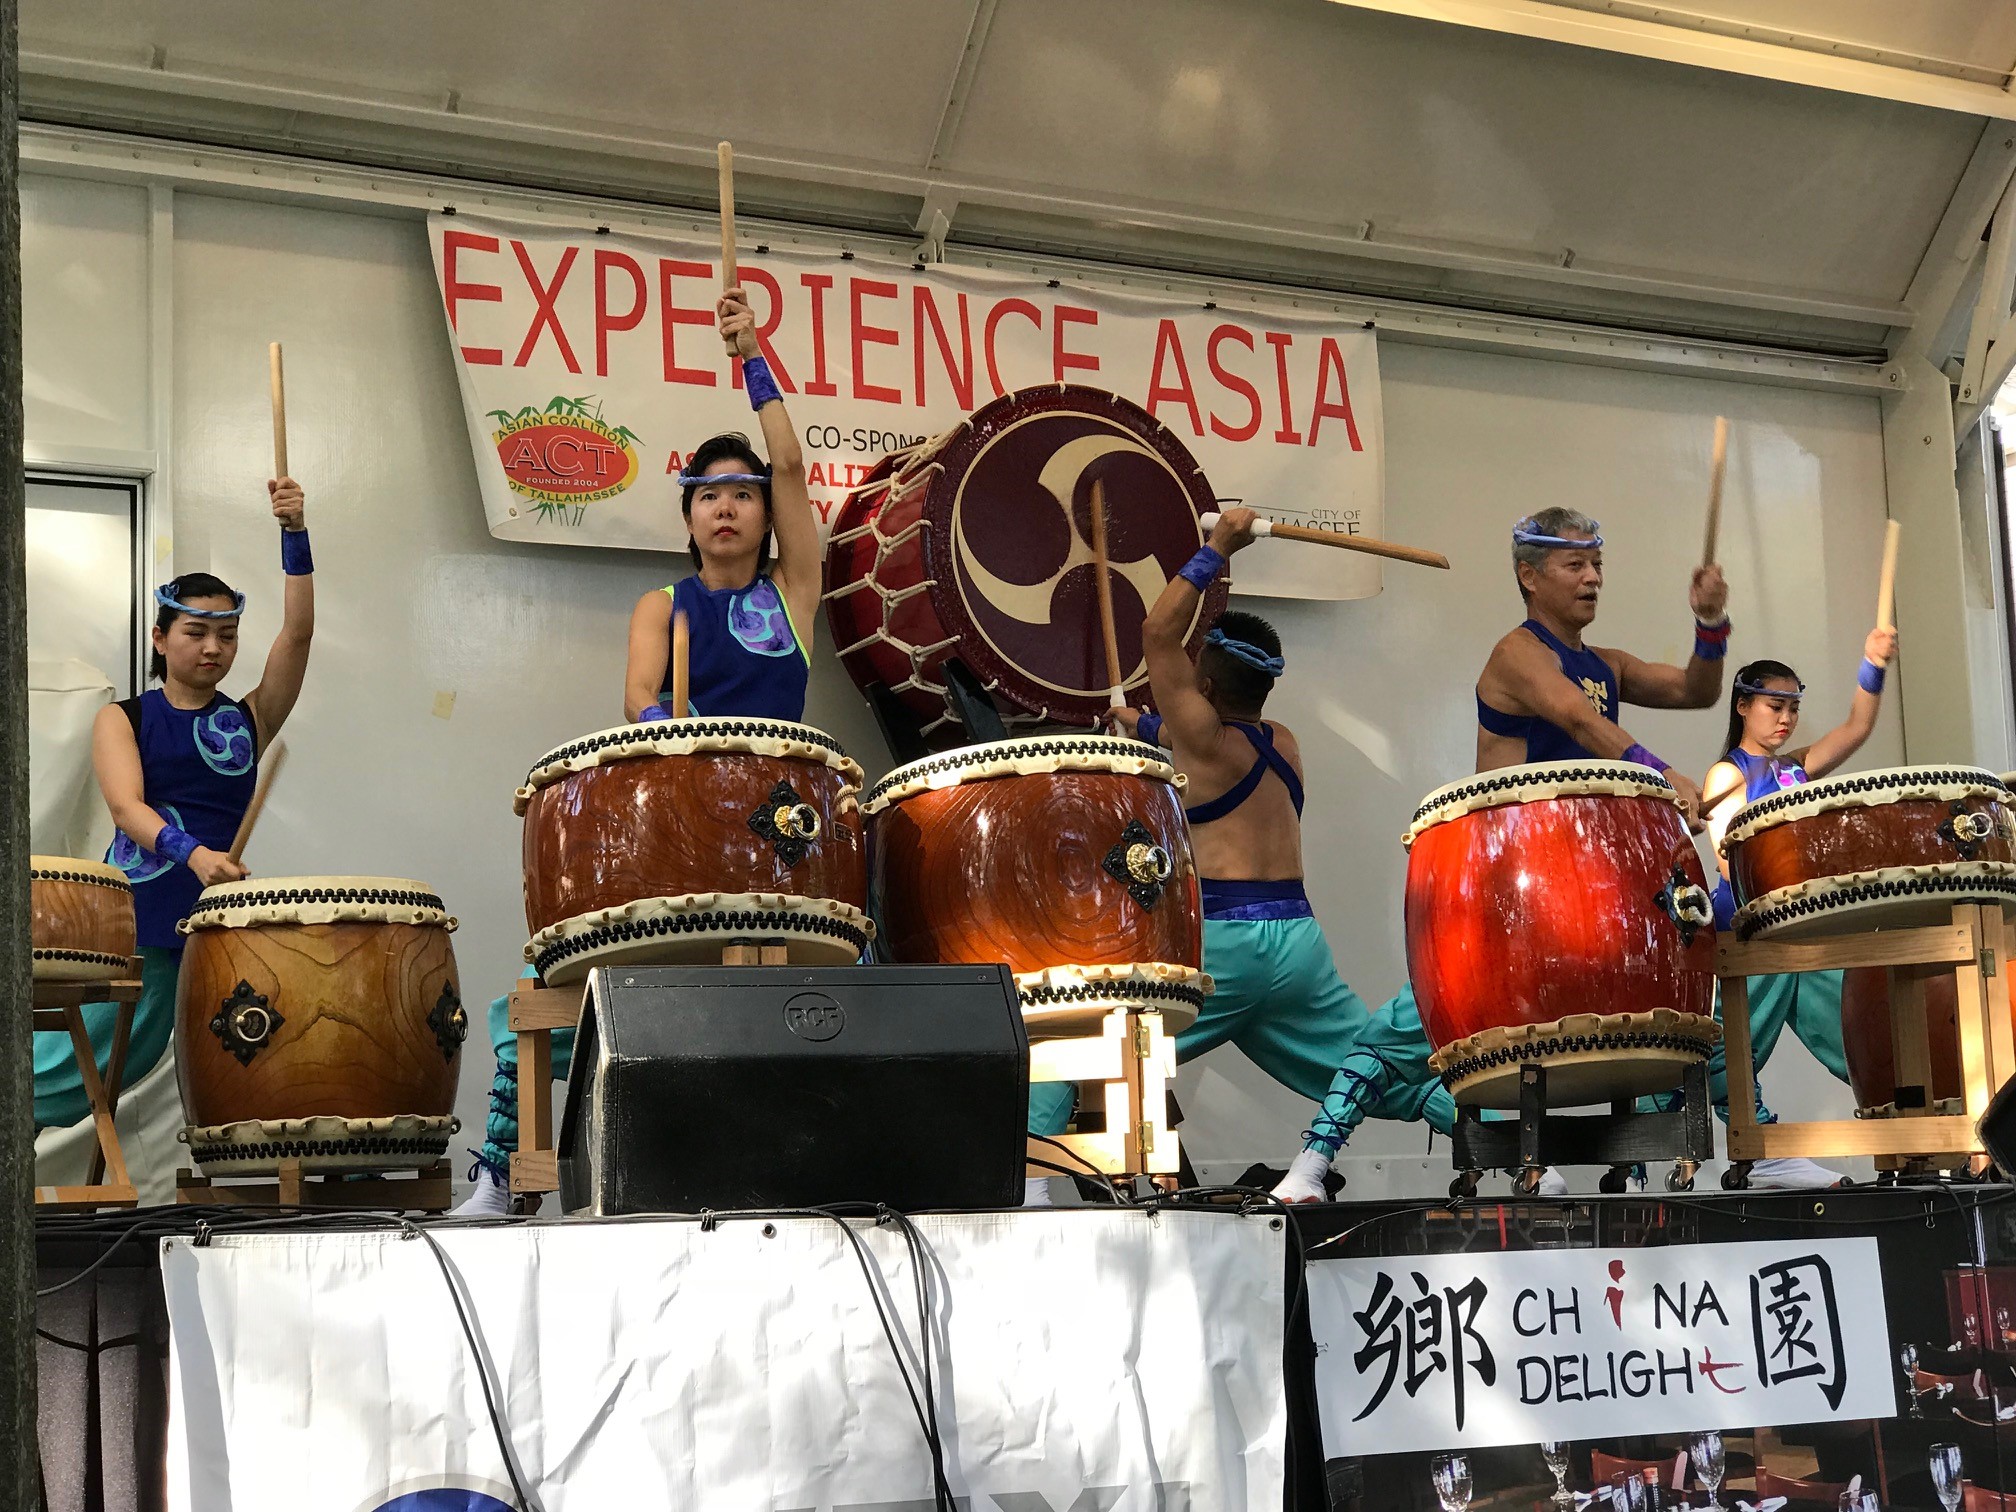 EPCOT’s Matsuriza Taiko Drummers perform at the Experience Asia Festival.